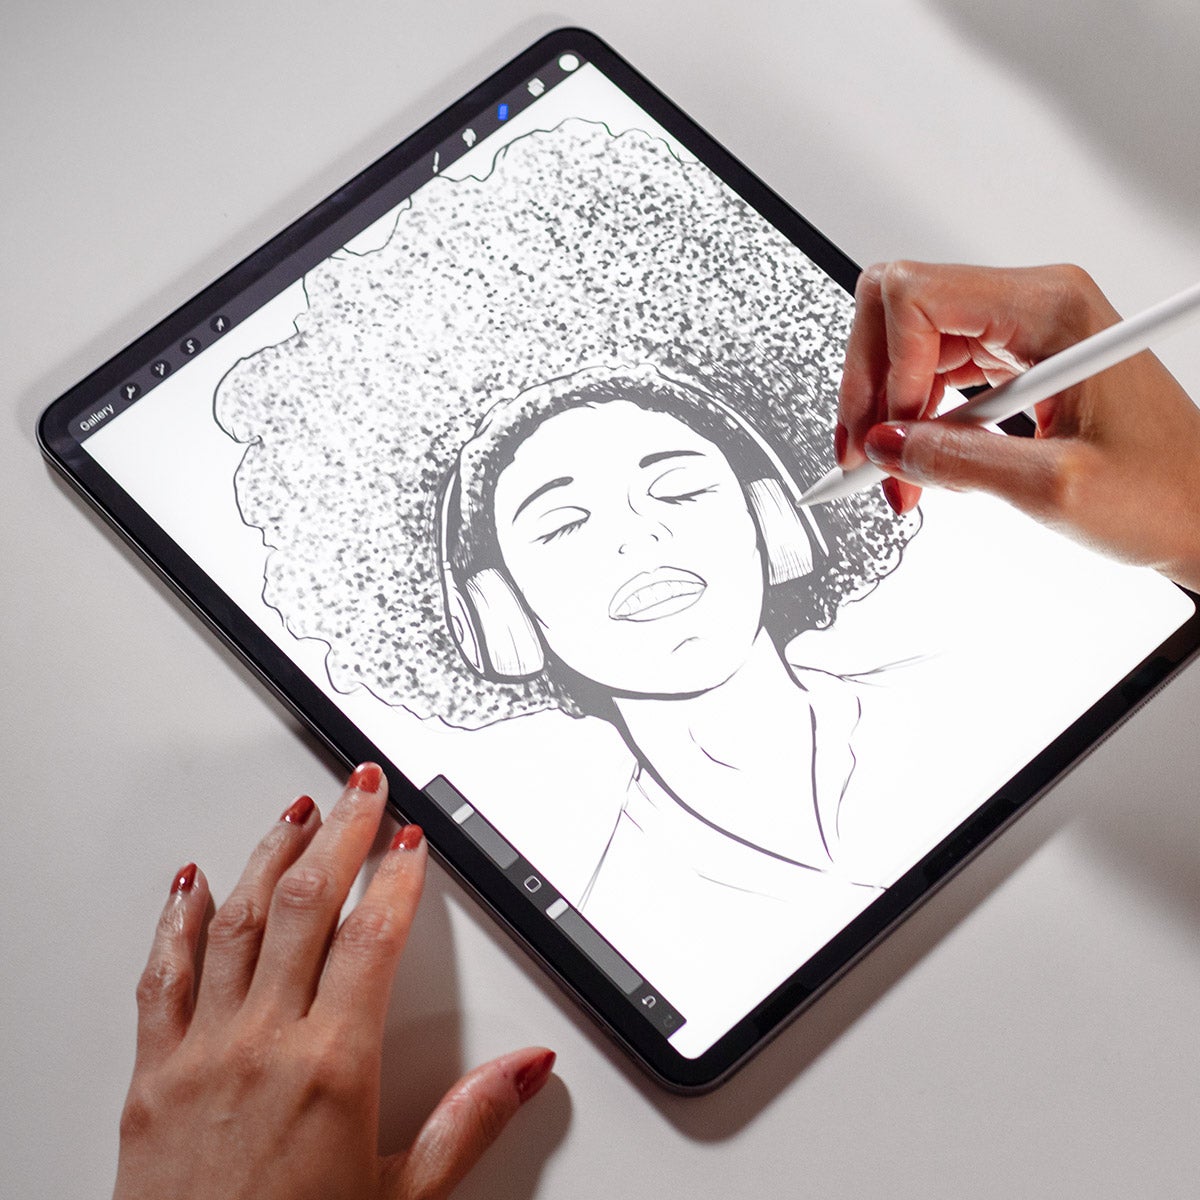 Designed for Writing and Drawing||The matte surface is perfect for writing and drawing on your iPad. 